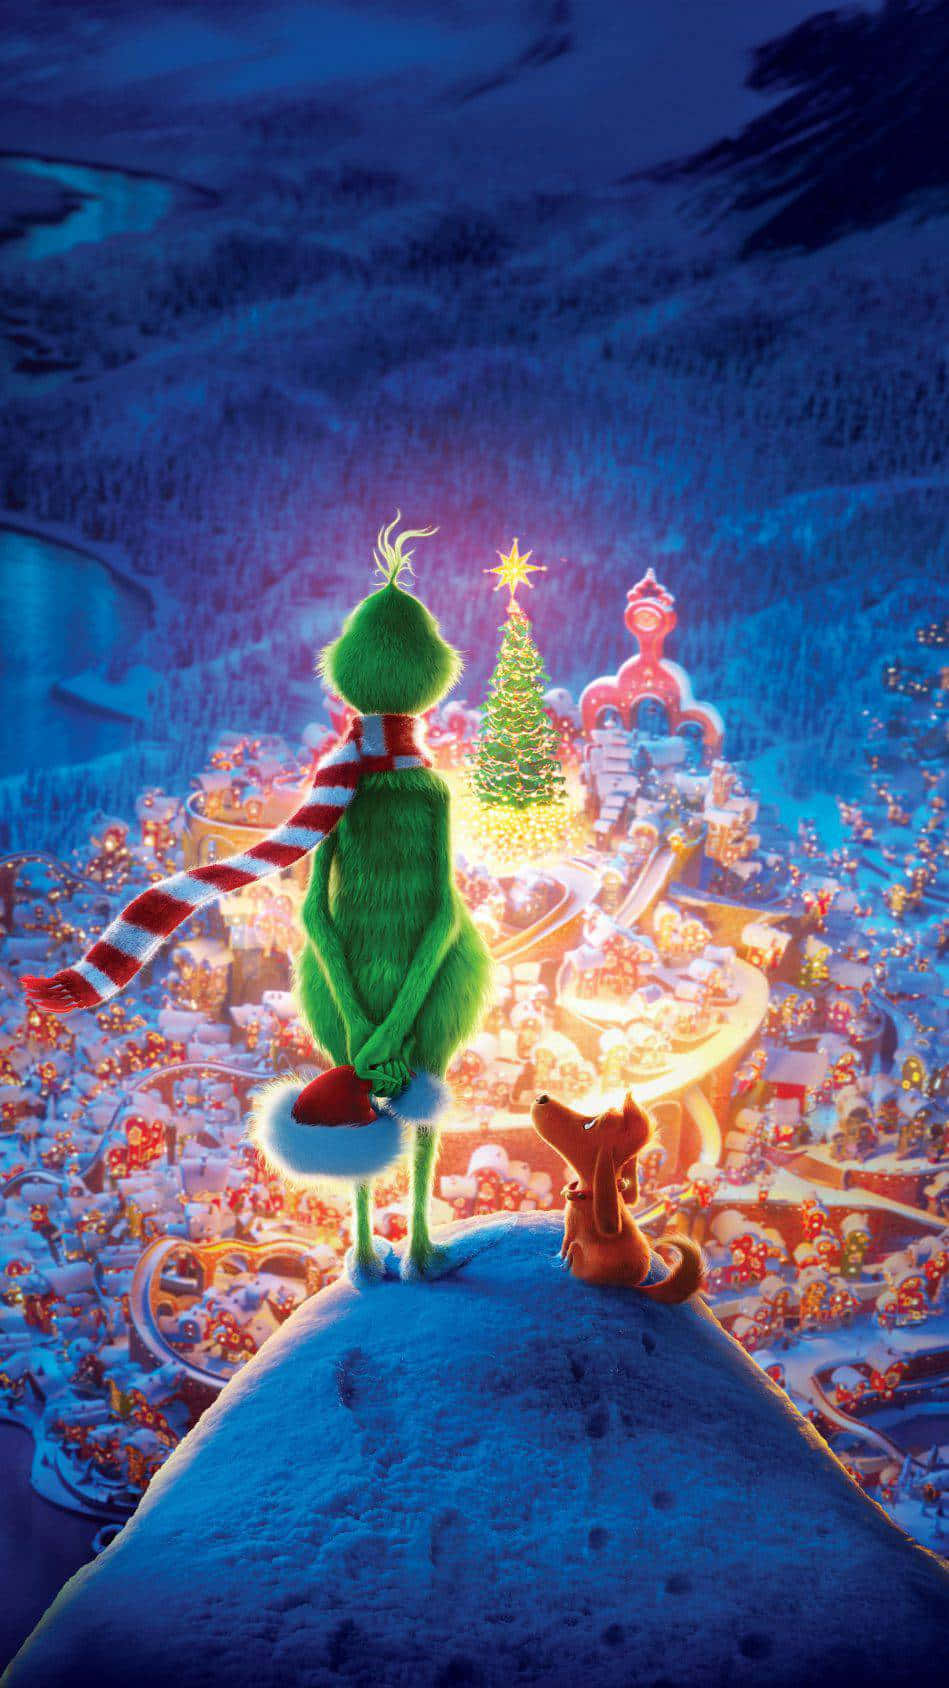 The Grinch Movie Poster Wallpaper